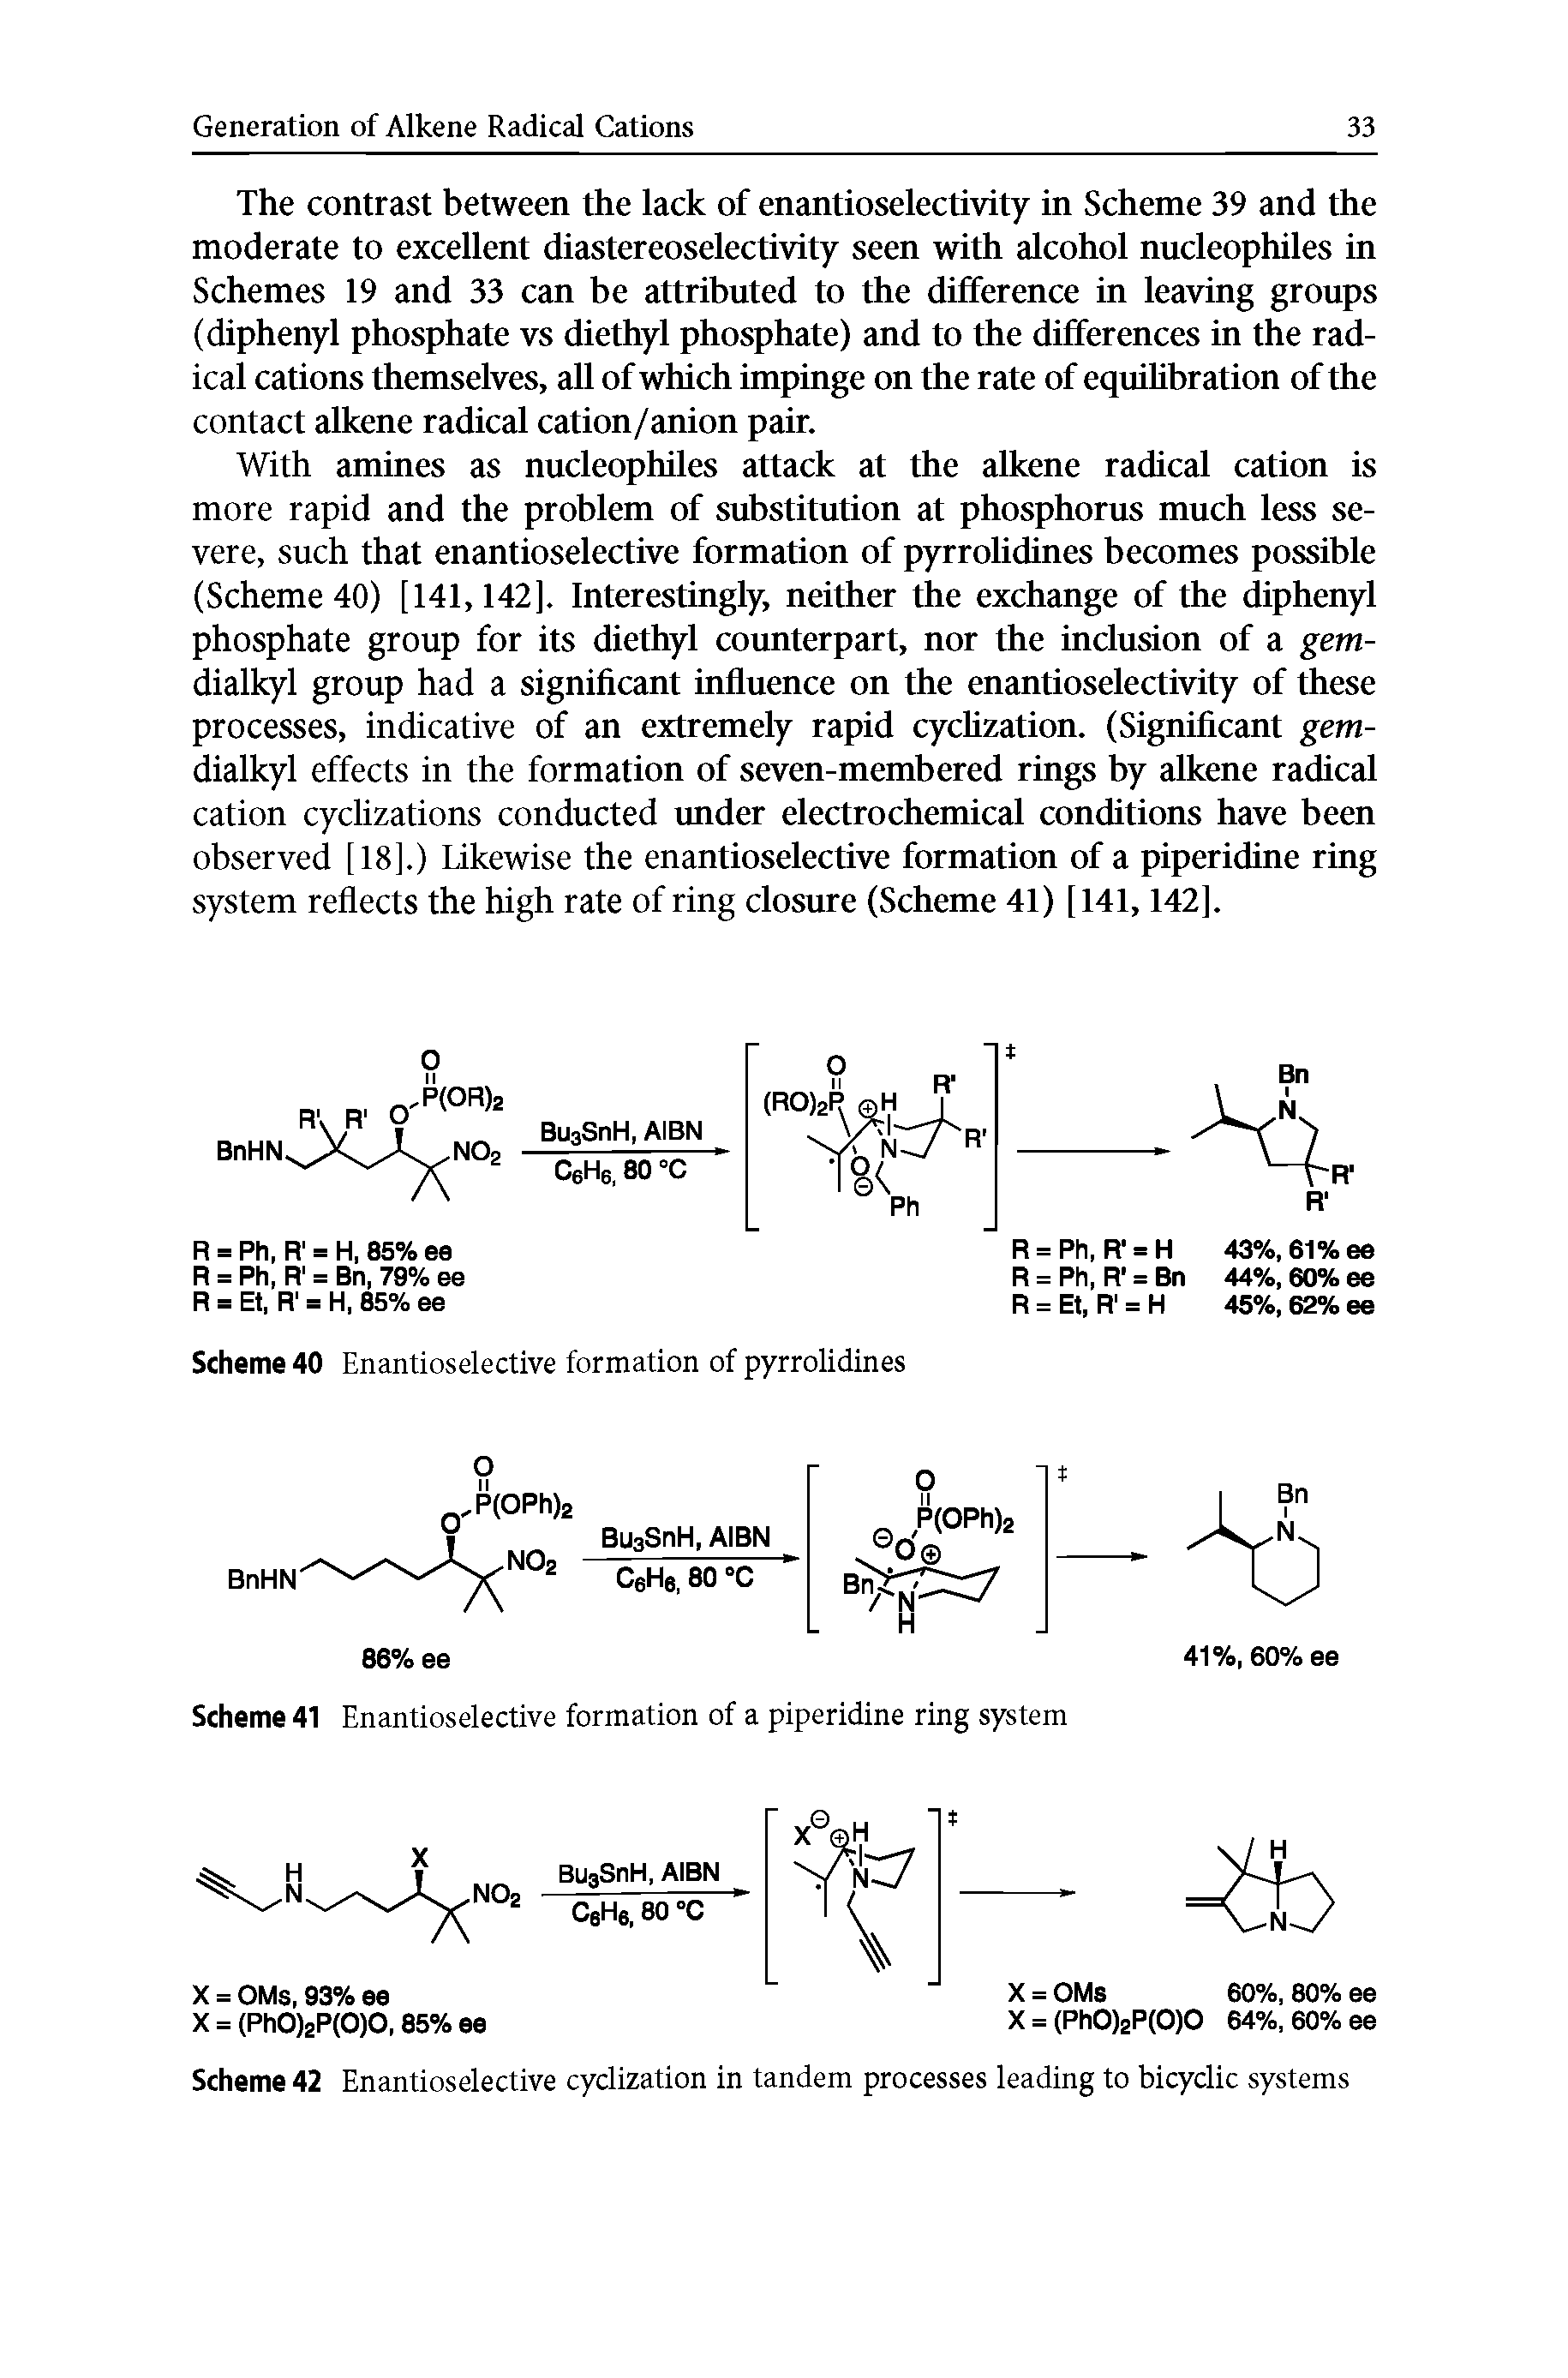 Scheme 41 Enantioselective formation of a piperidine ring system...